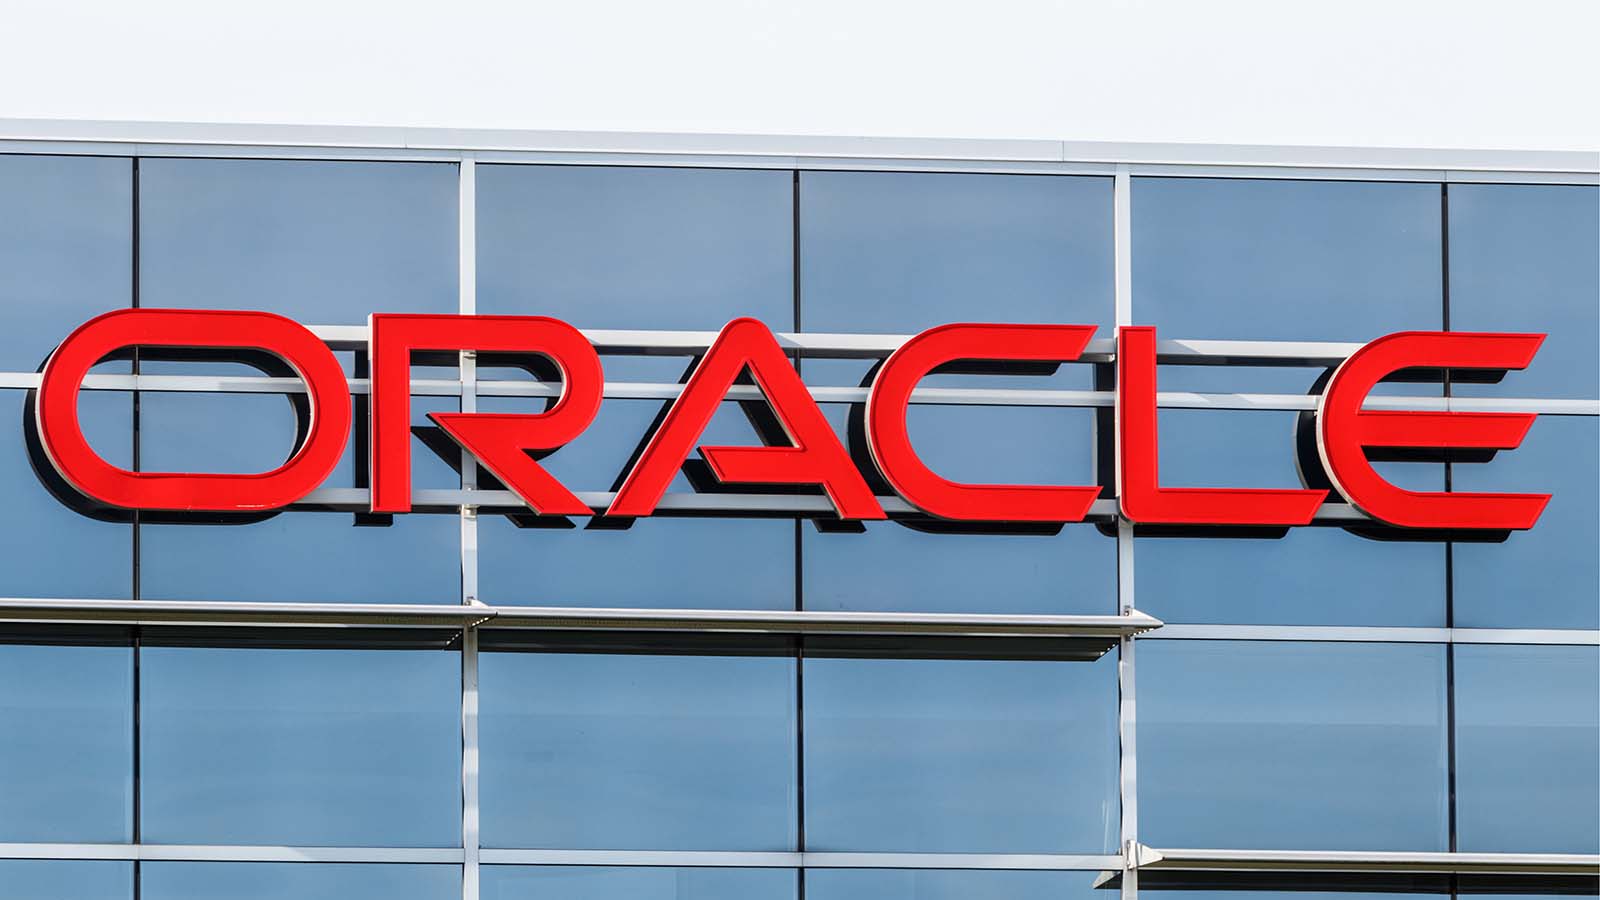 The Oracle (ORCL stock) sign hangs on an Oracle office in Deerfield, Illinois.